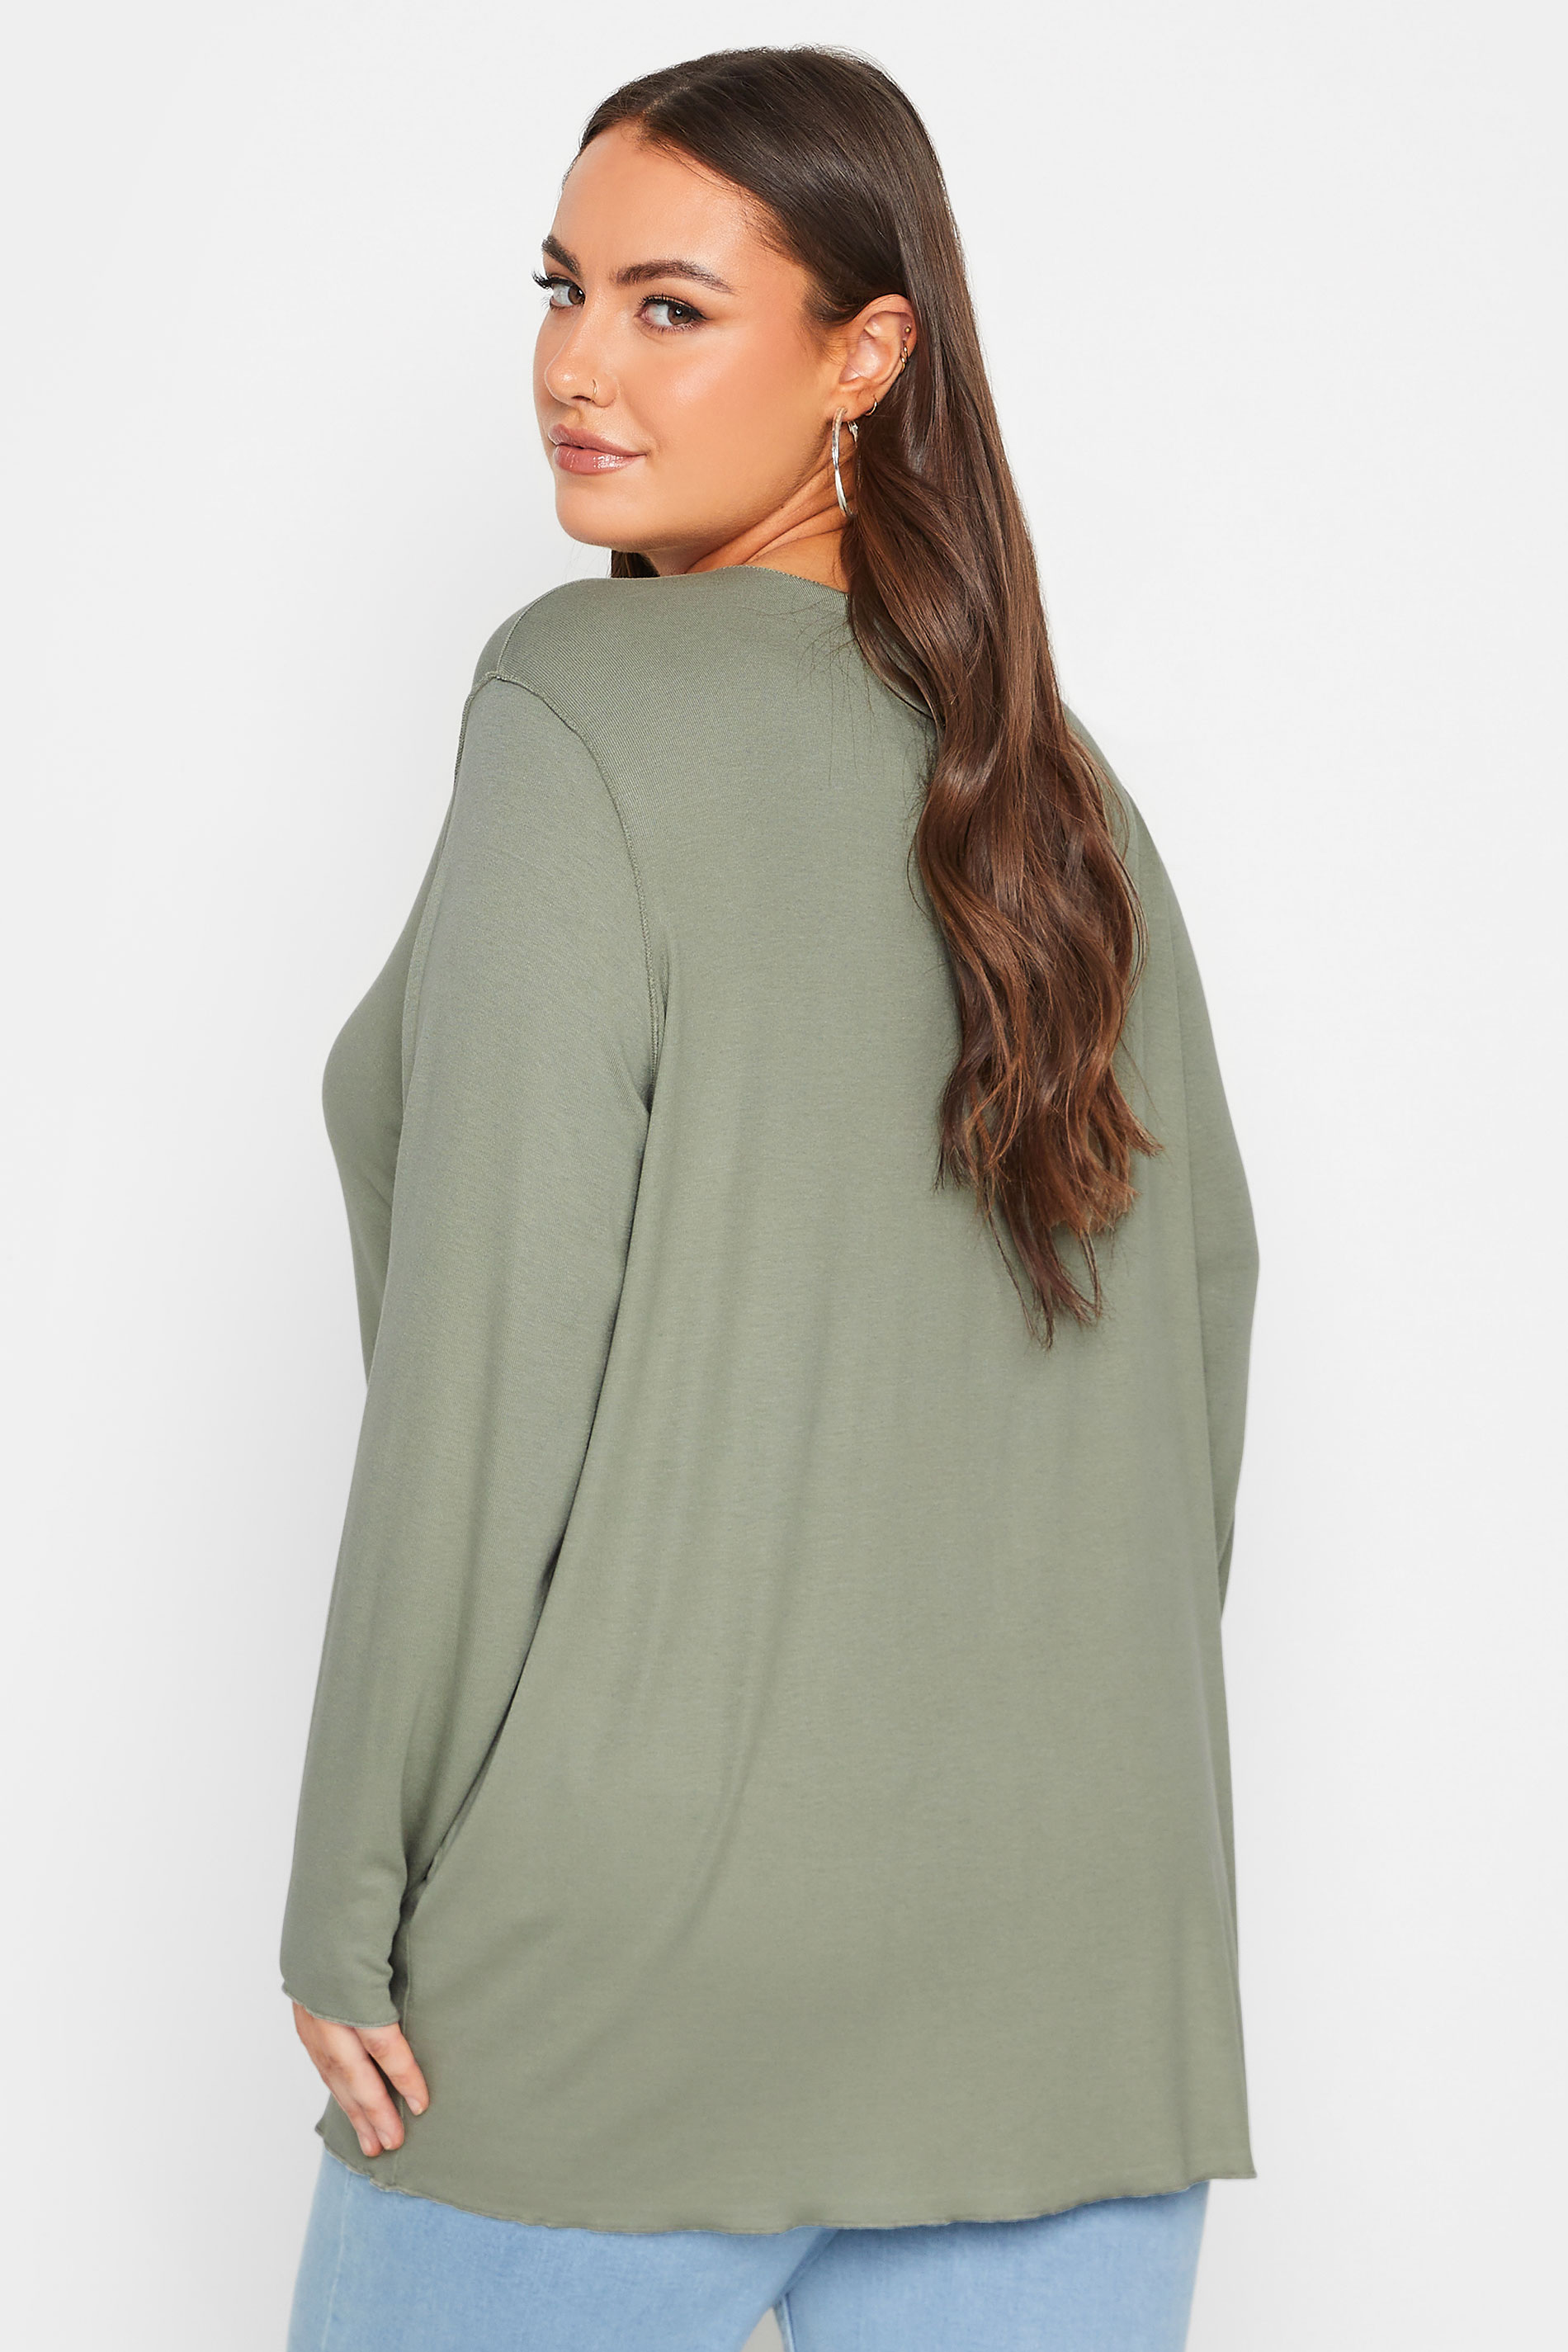 YOURS Curve Plus Size Khaki Green Front Seam Top | Yours Clothing  3